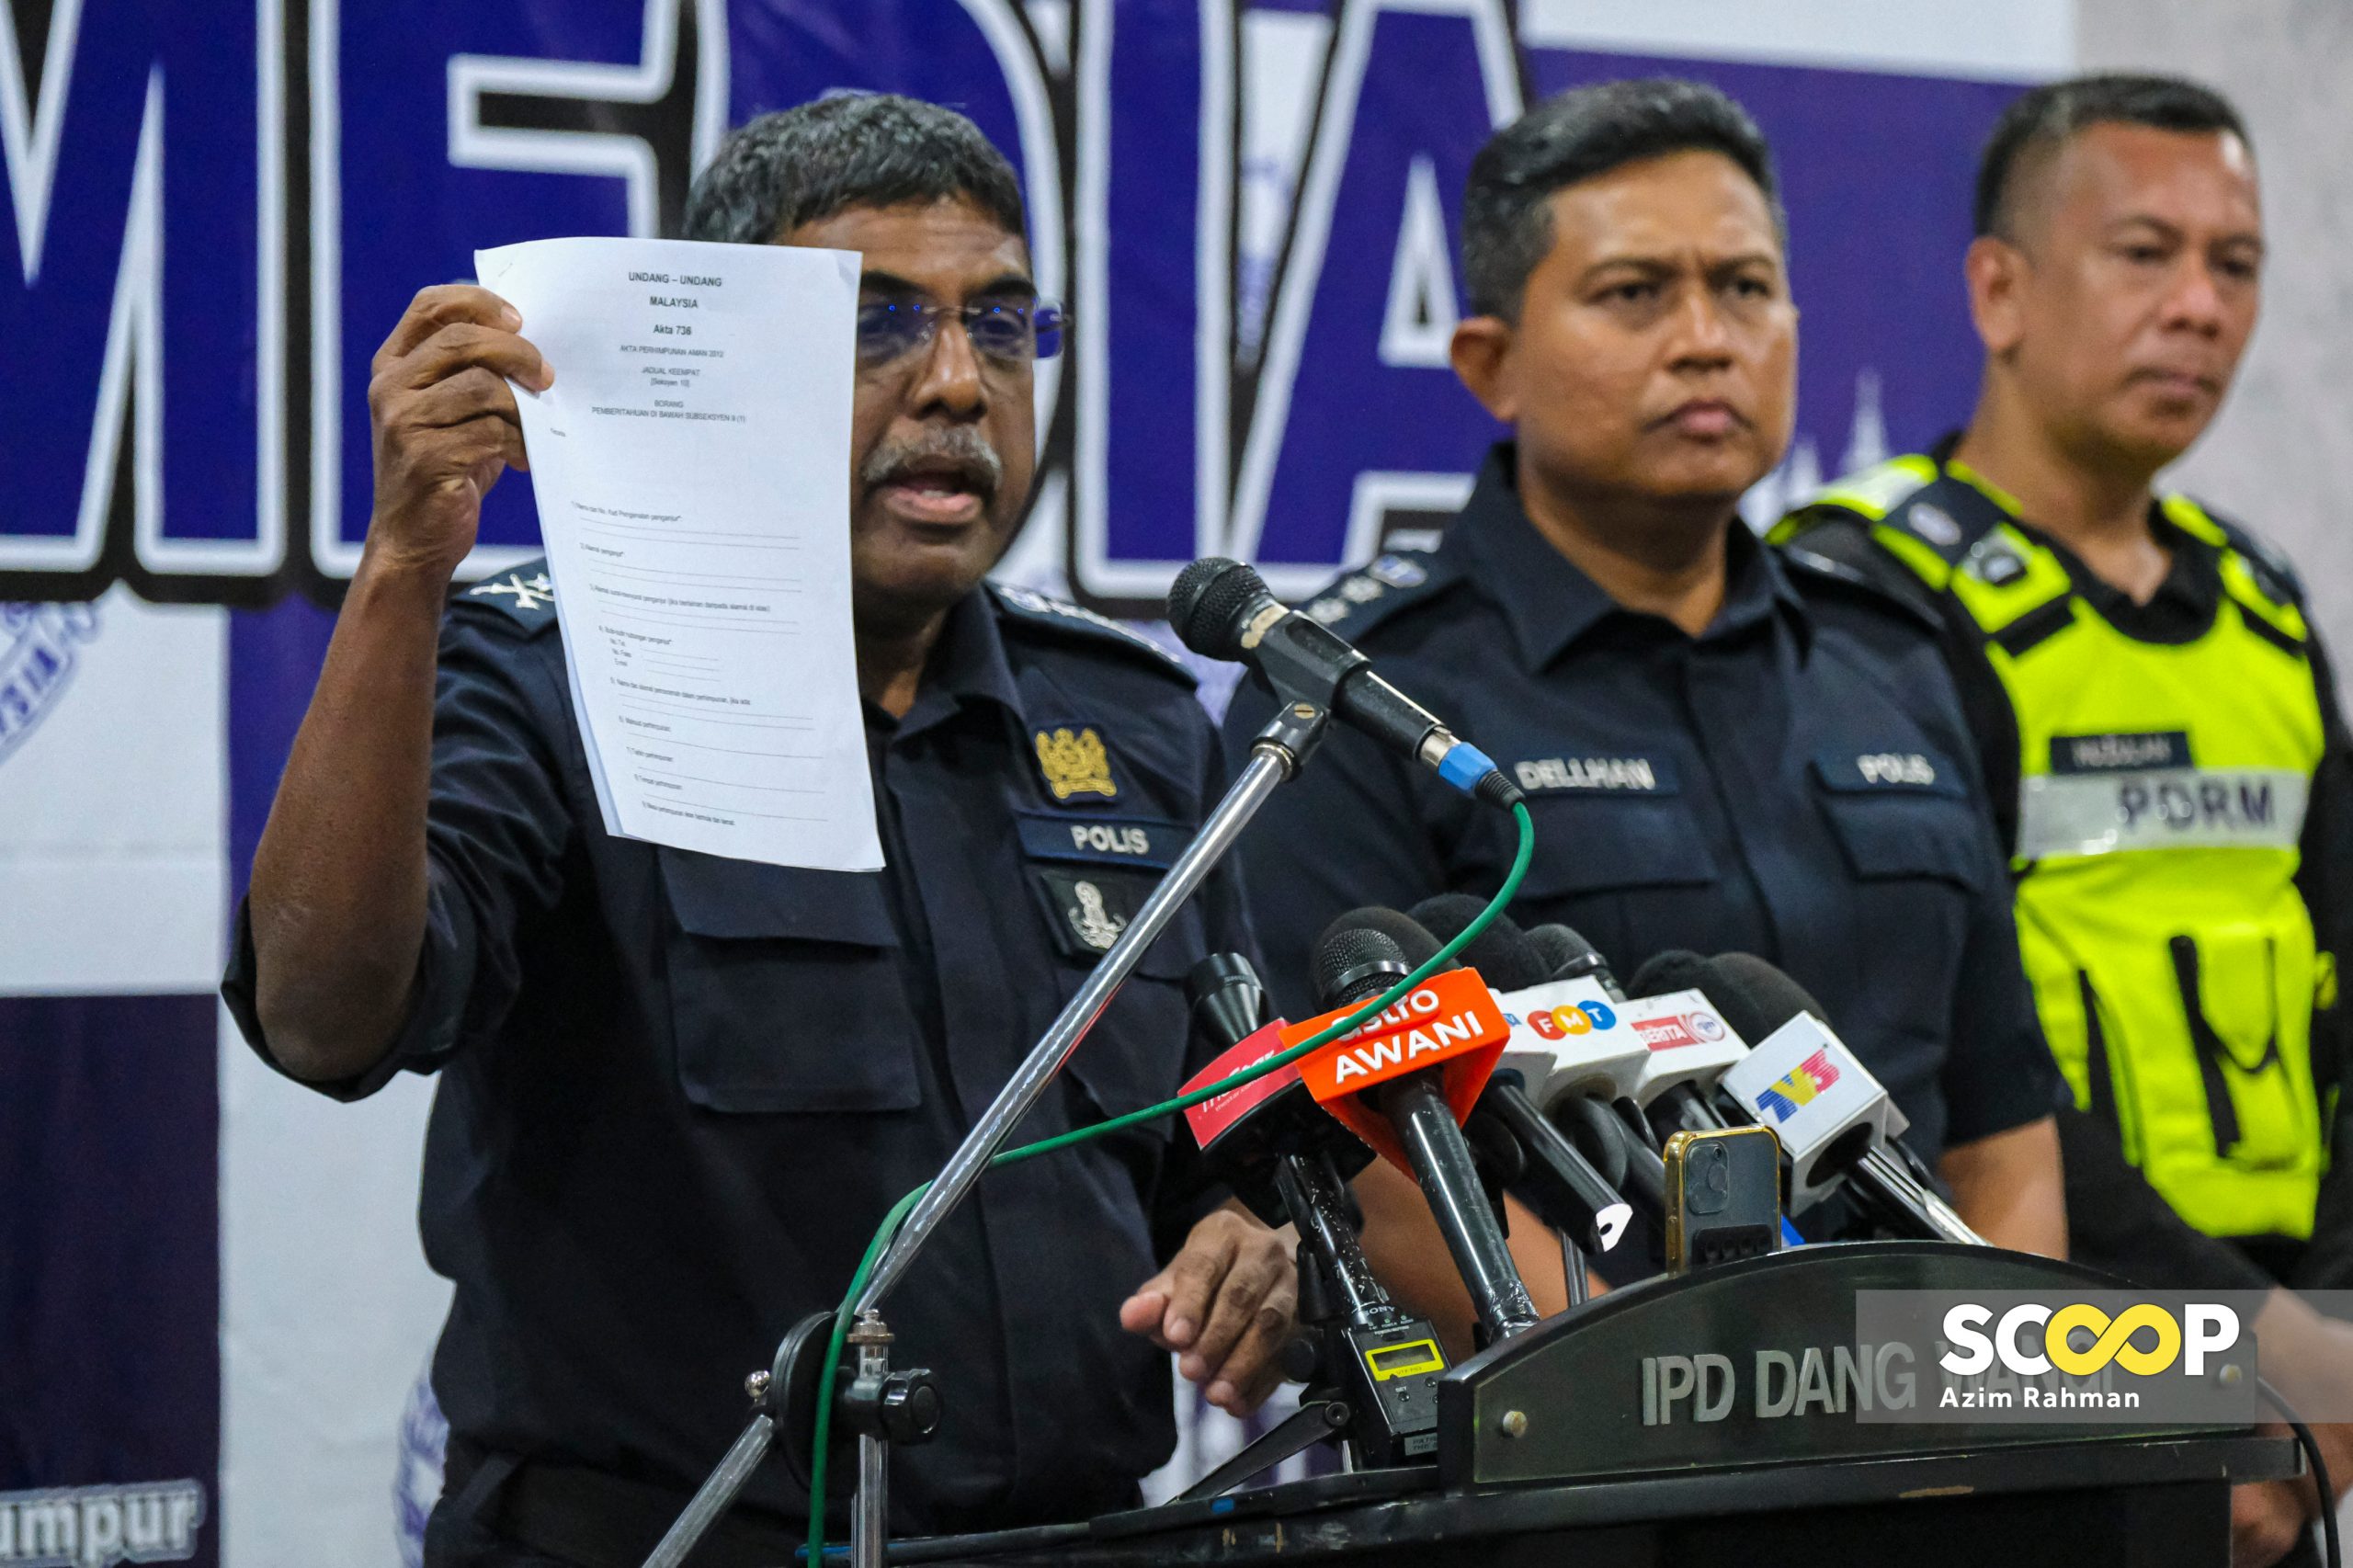 ‘Public gatherings must adhere to Peaceful Assembly Act so police can protect the public’